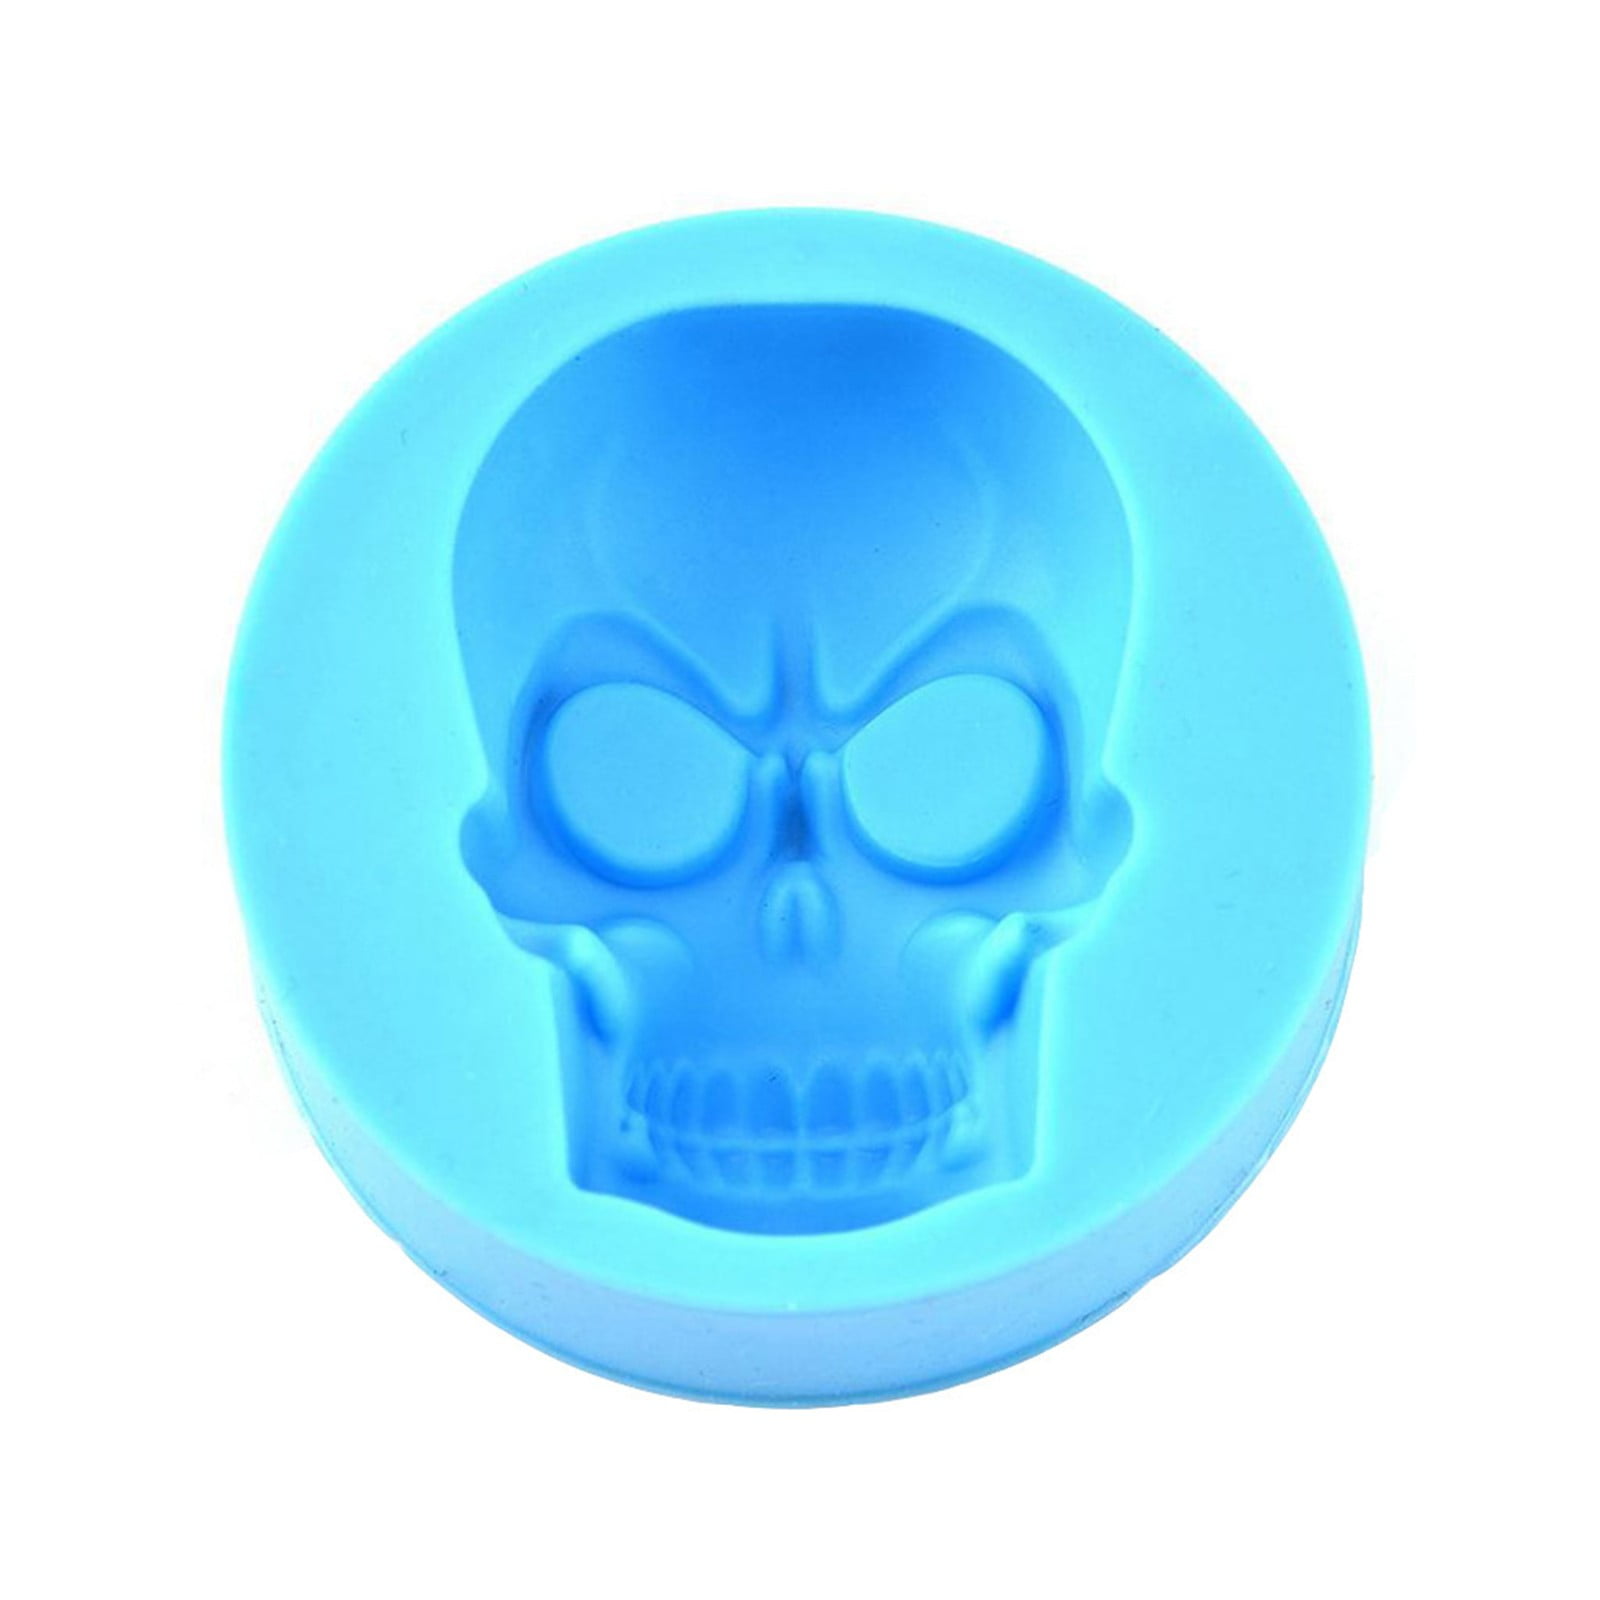 WFZ17 3D Skull Silicone Cake Chocolate Baking Ice Tray Mold Halloween Decorations Blue